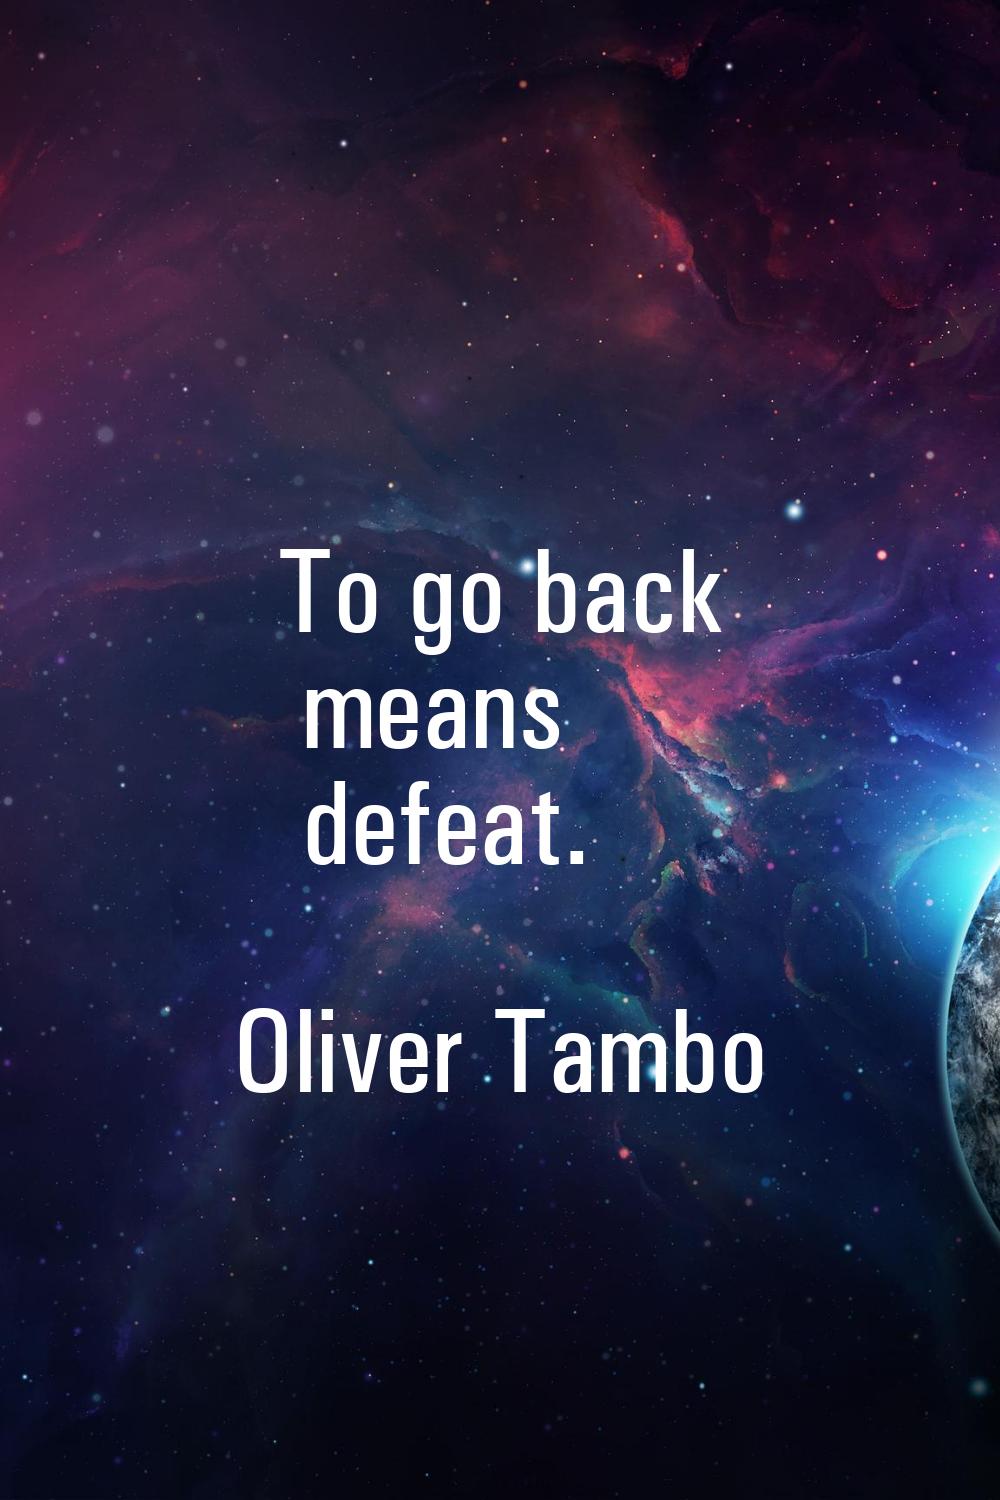 To go back means defeat.